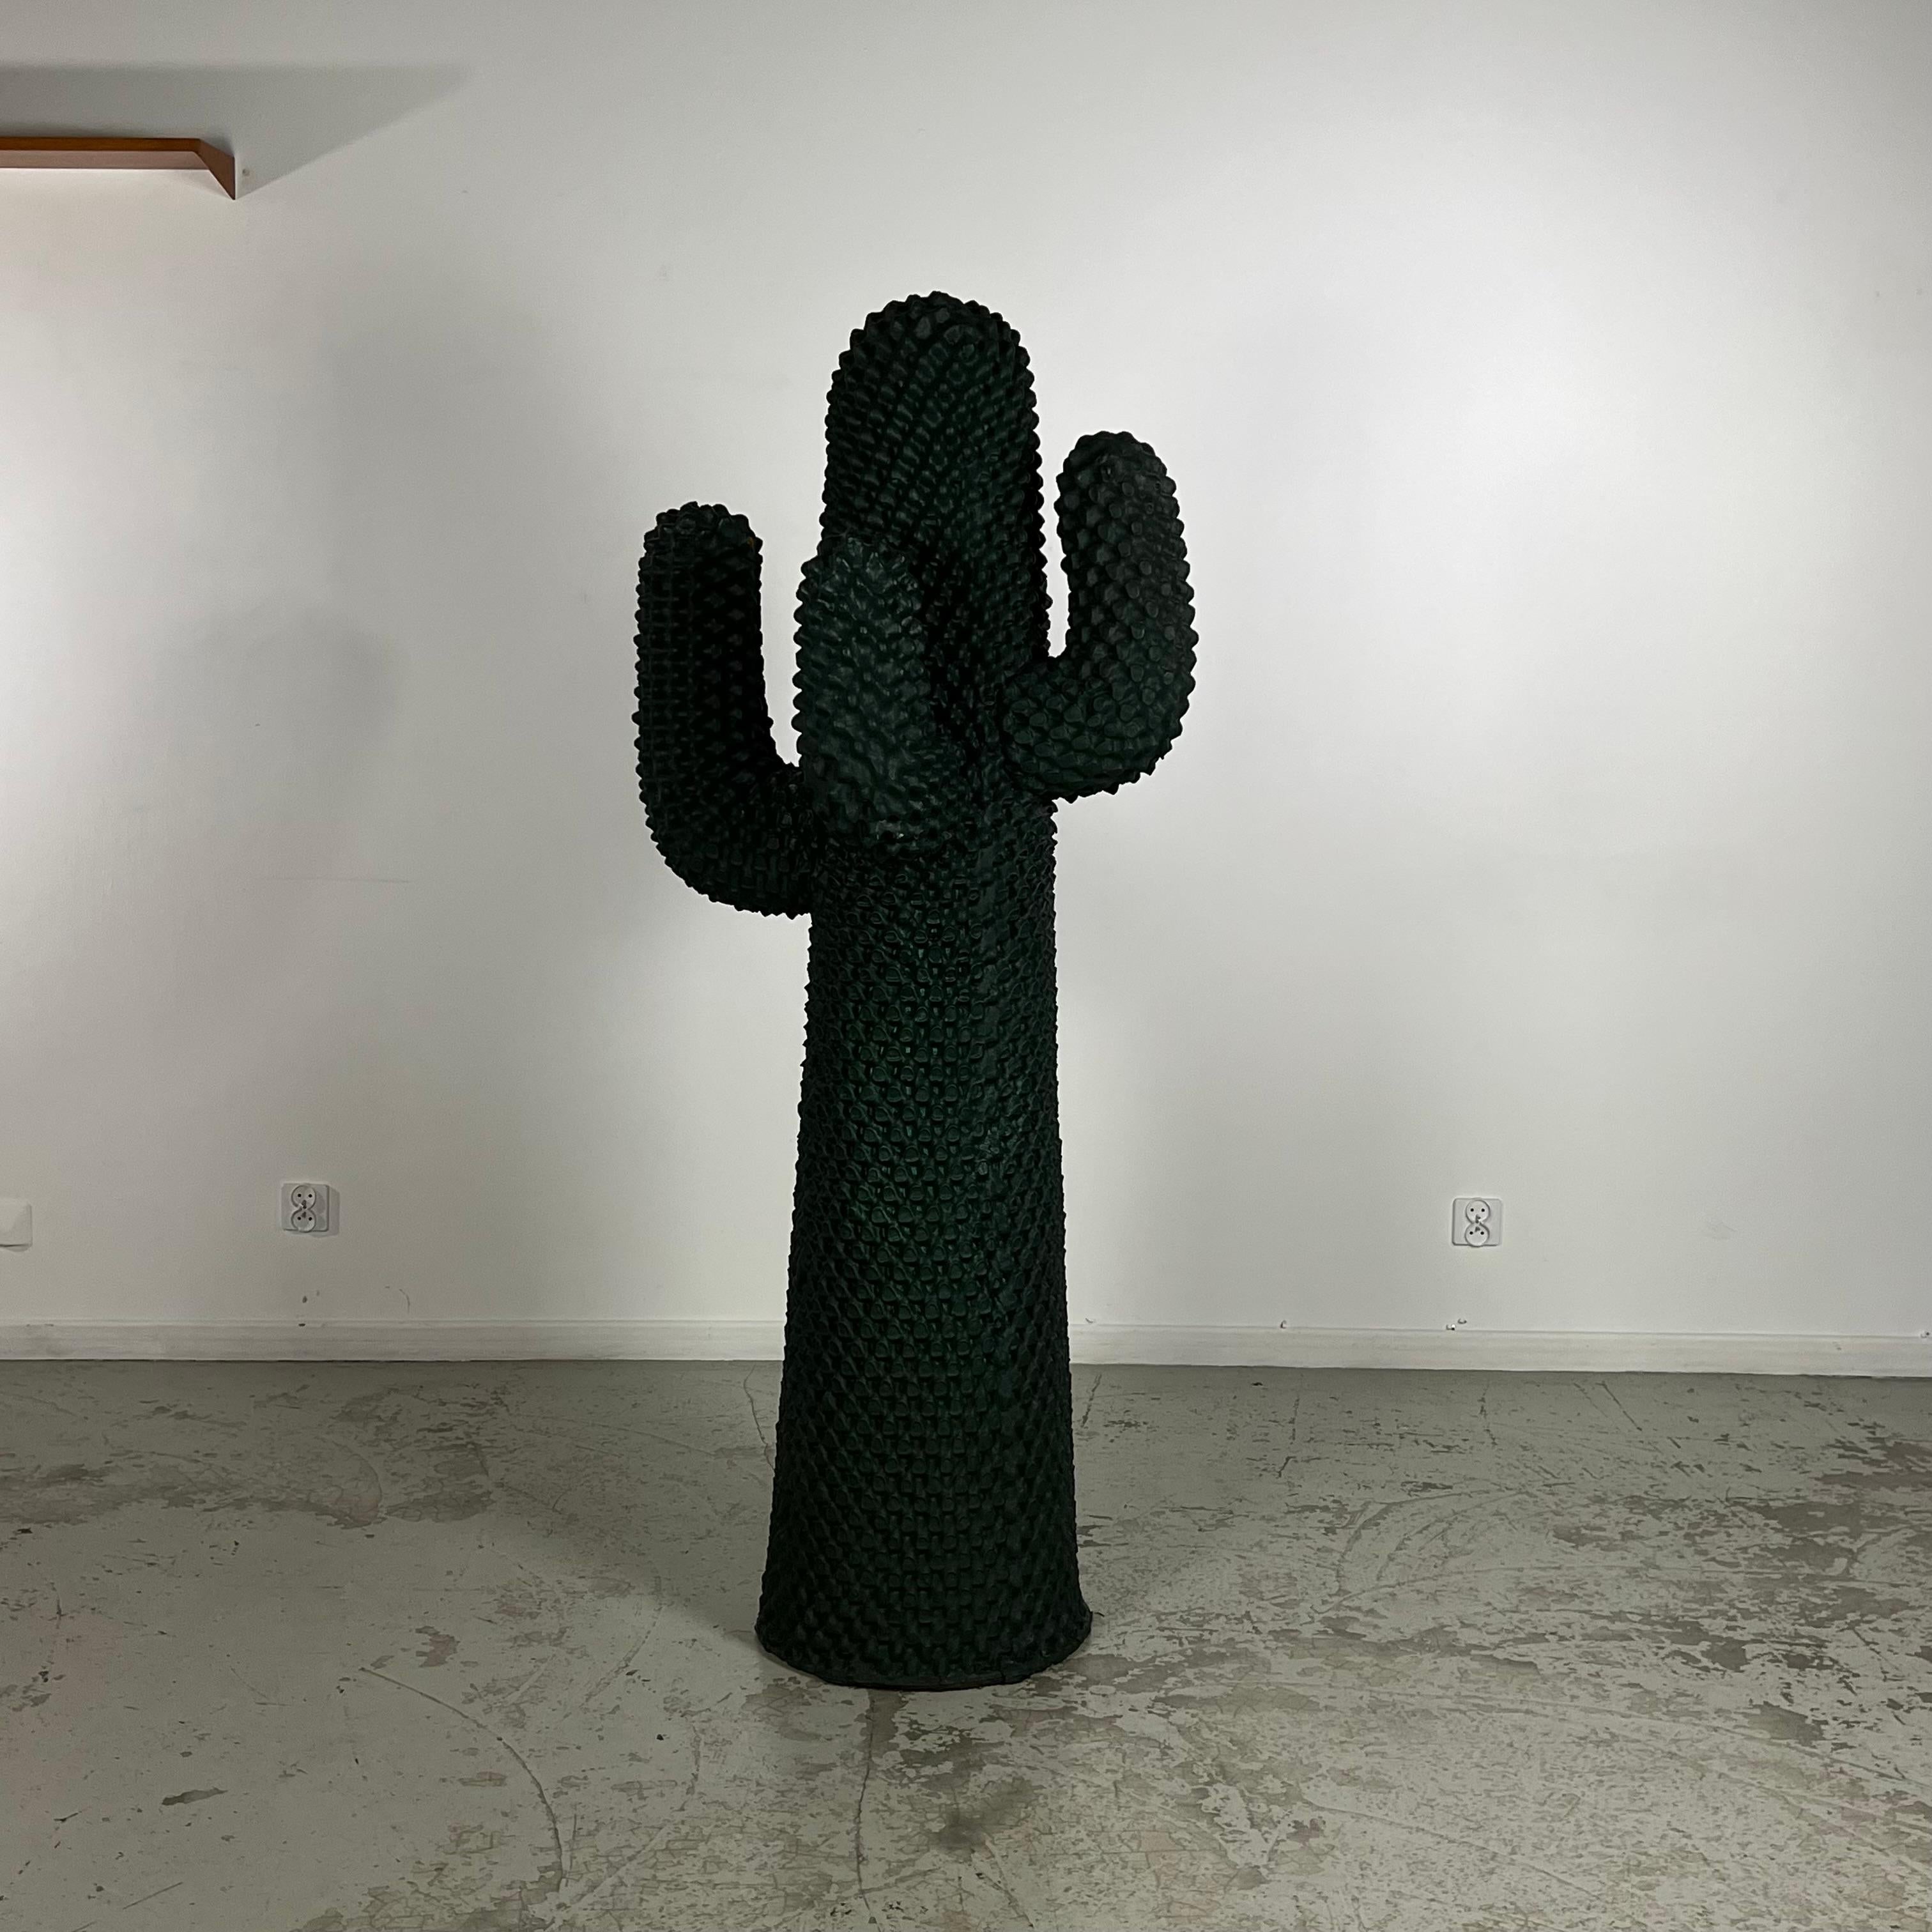 The Cactus coat anger was designed by Guido Drocco and Franco Mello for Gufram, an Italian manufacturer in the early 70’s. Its design is part of the «Ra-
dical Design» movement, in the early 60’s in Italy, freeing itself from the rules of modernism